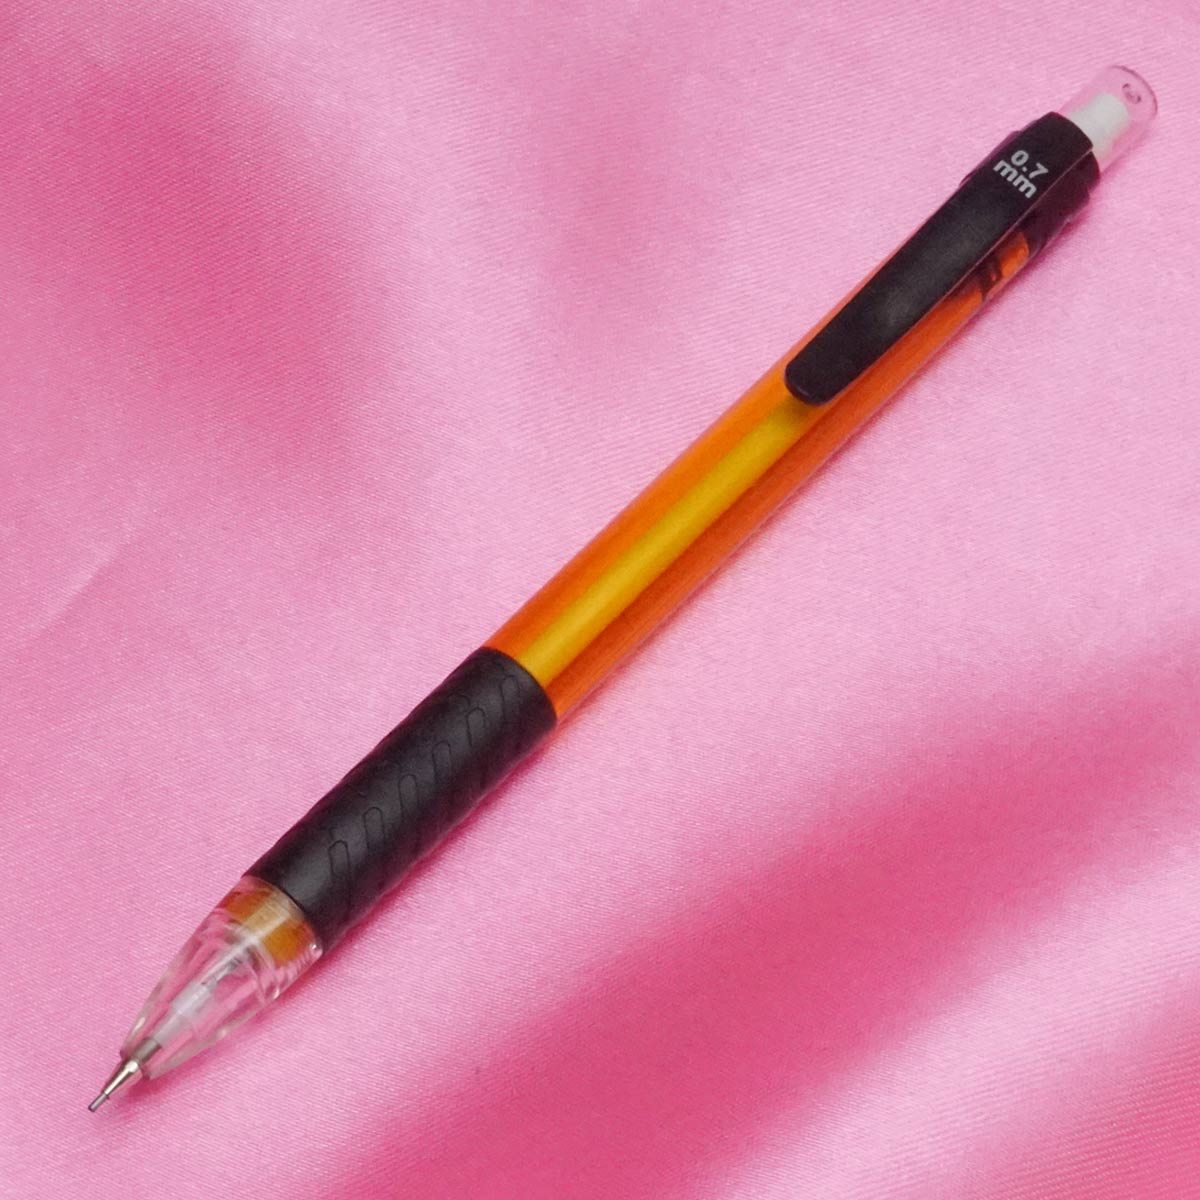 Cello Supreme 0.7mm Transparent Yellow Color Body With Eraser Led Pencil SKU 21423